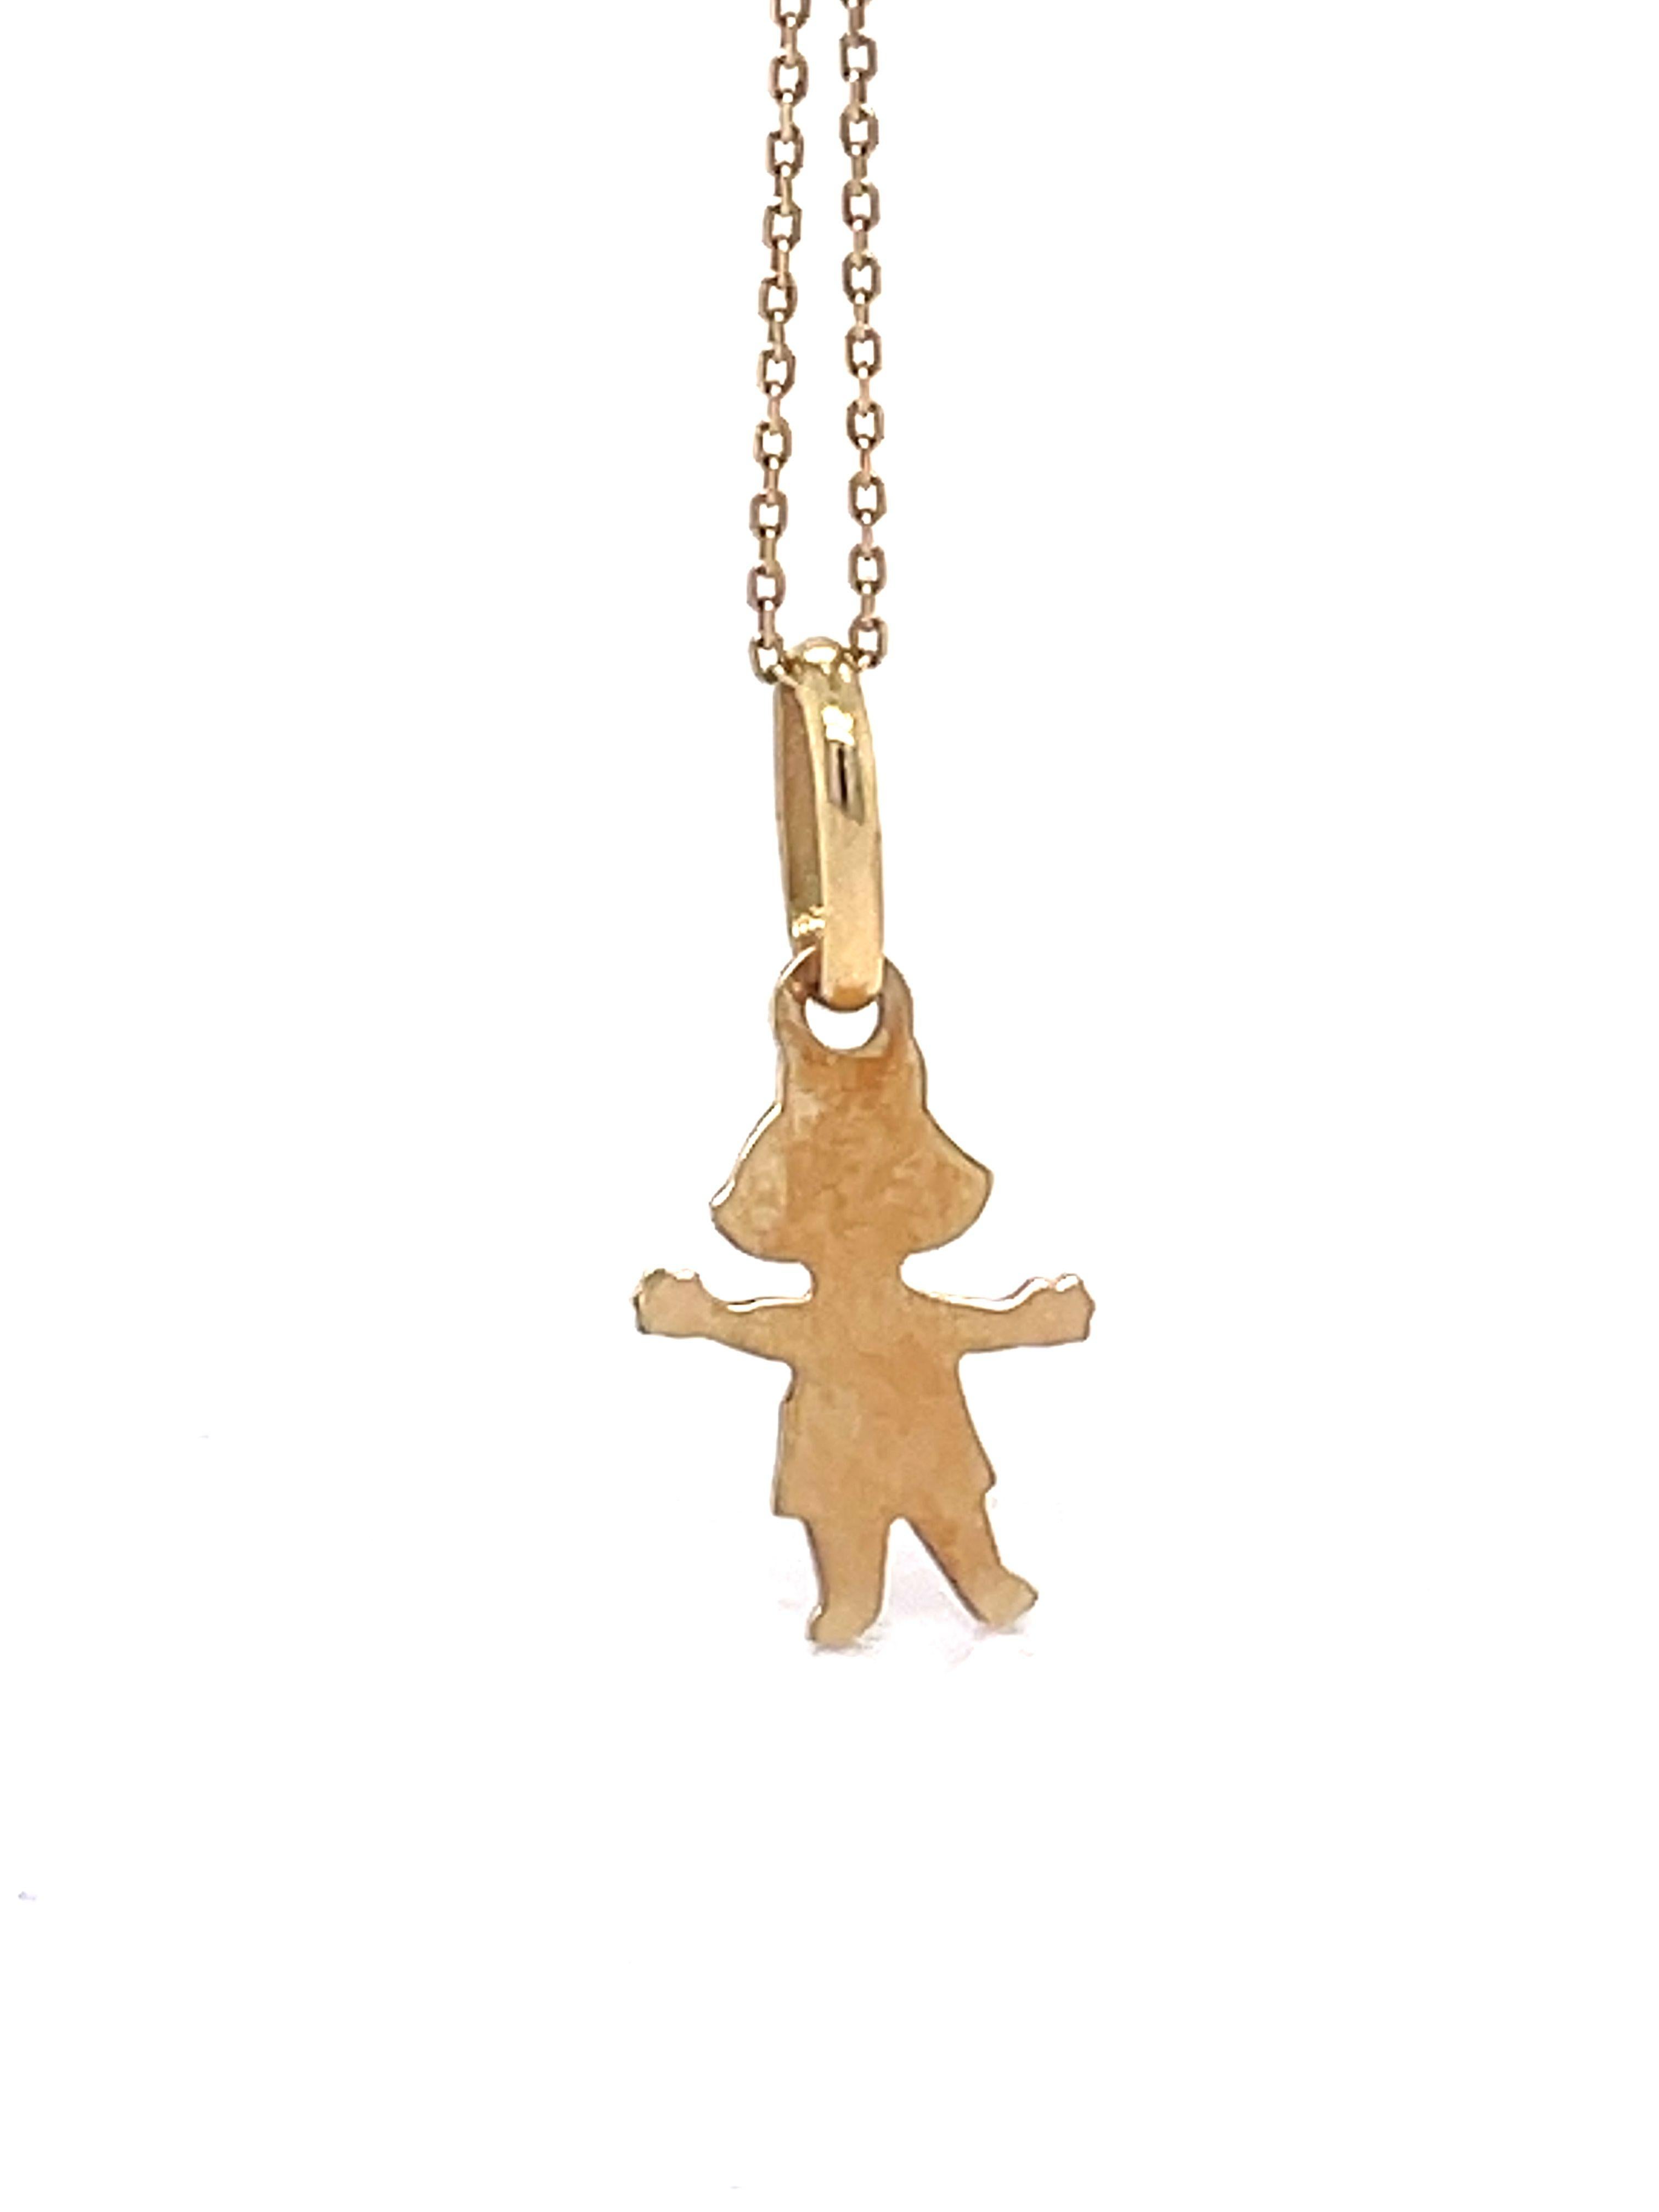 Girl necklace, 14K Yellow Gold, Child Pendant Necklace, Presant for new mom For Sale 2